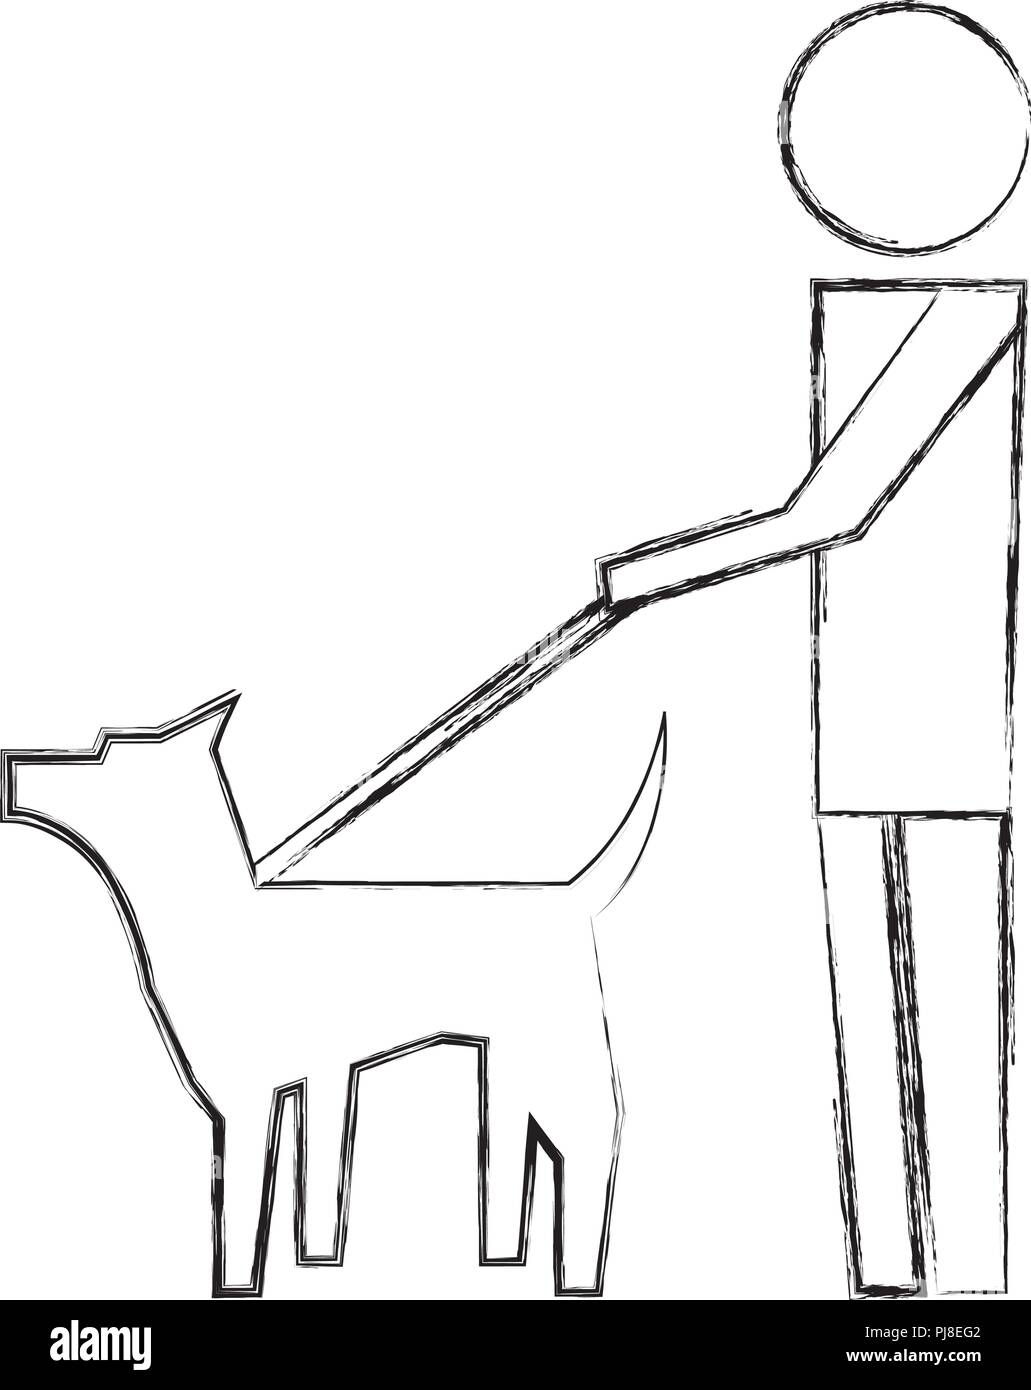 man walking with pet dog pictogram image Stock Vector